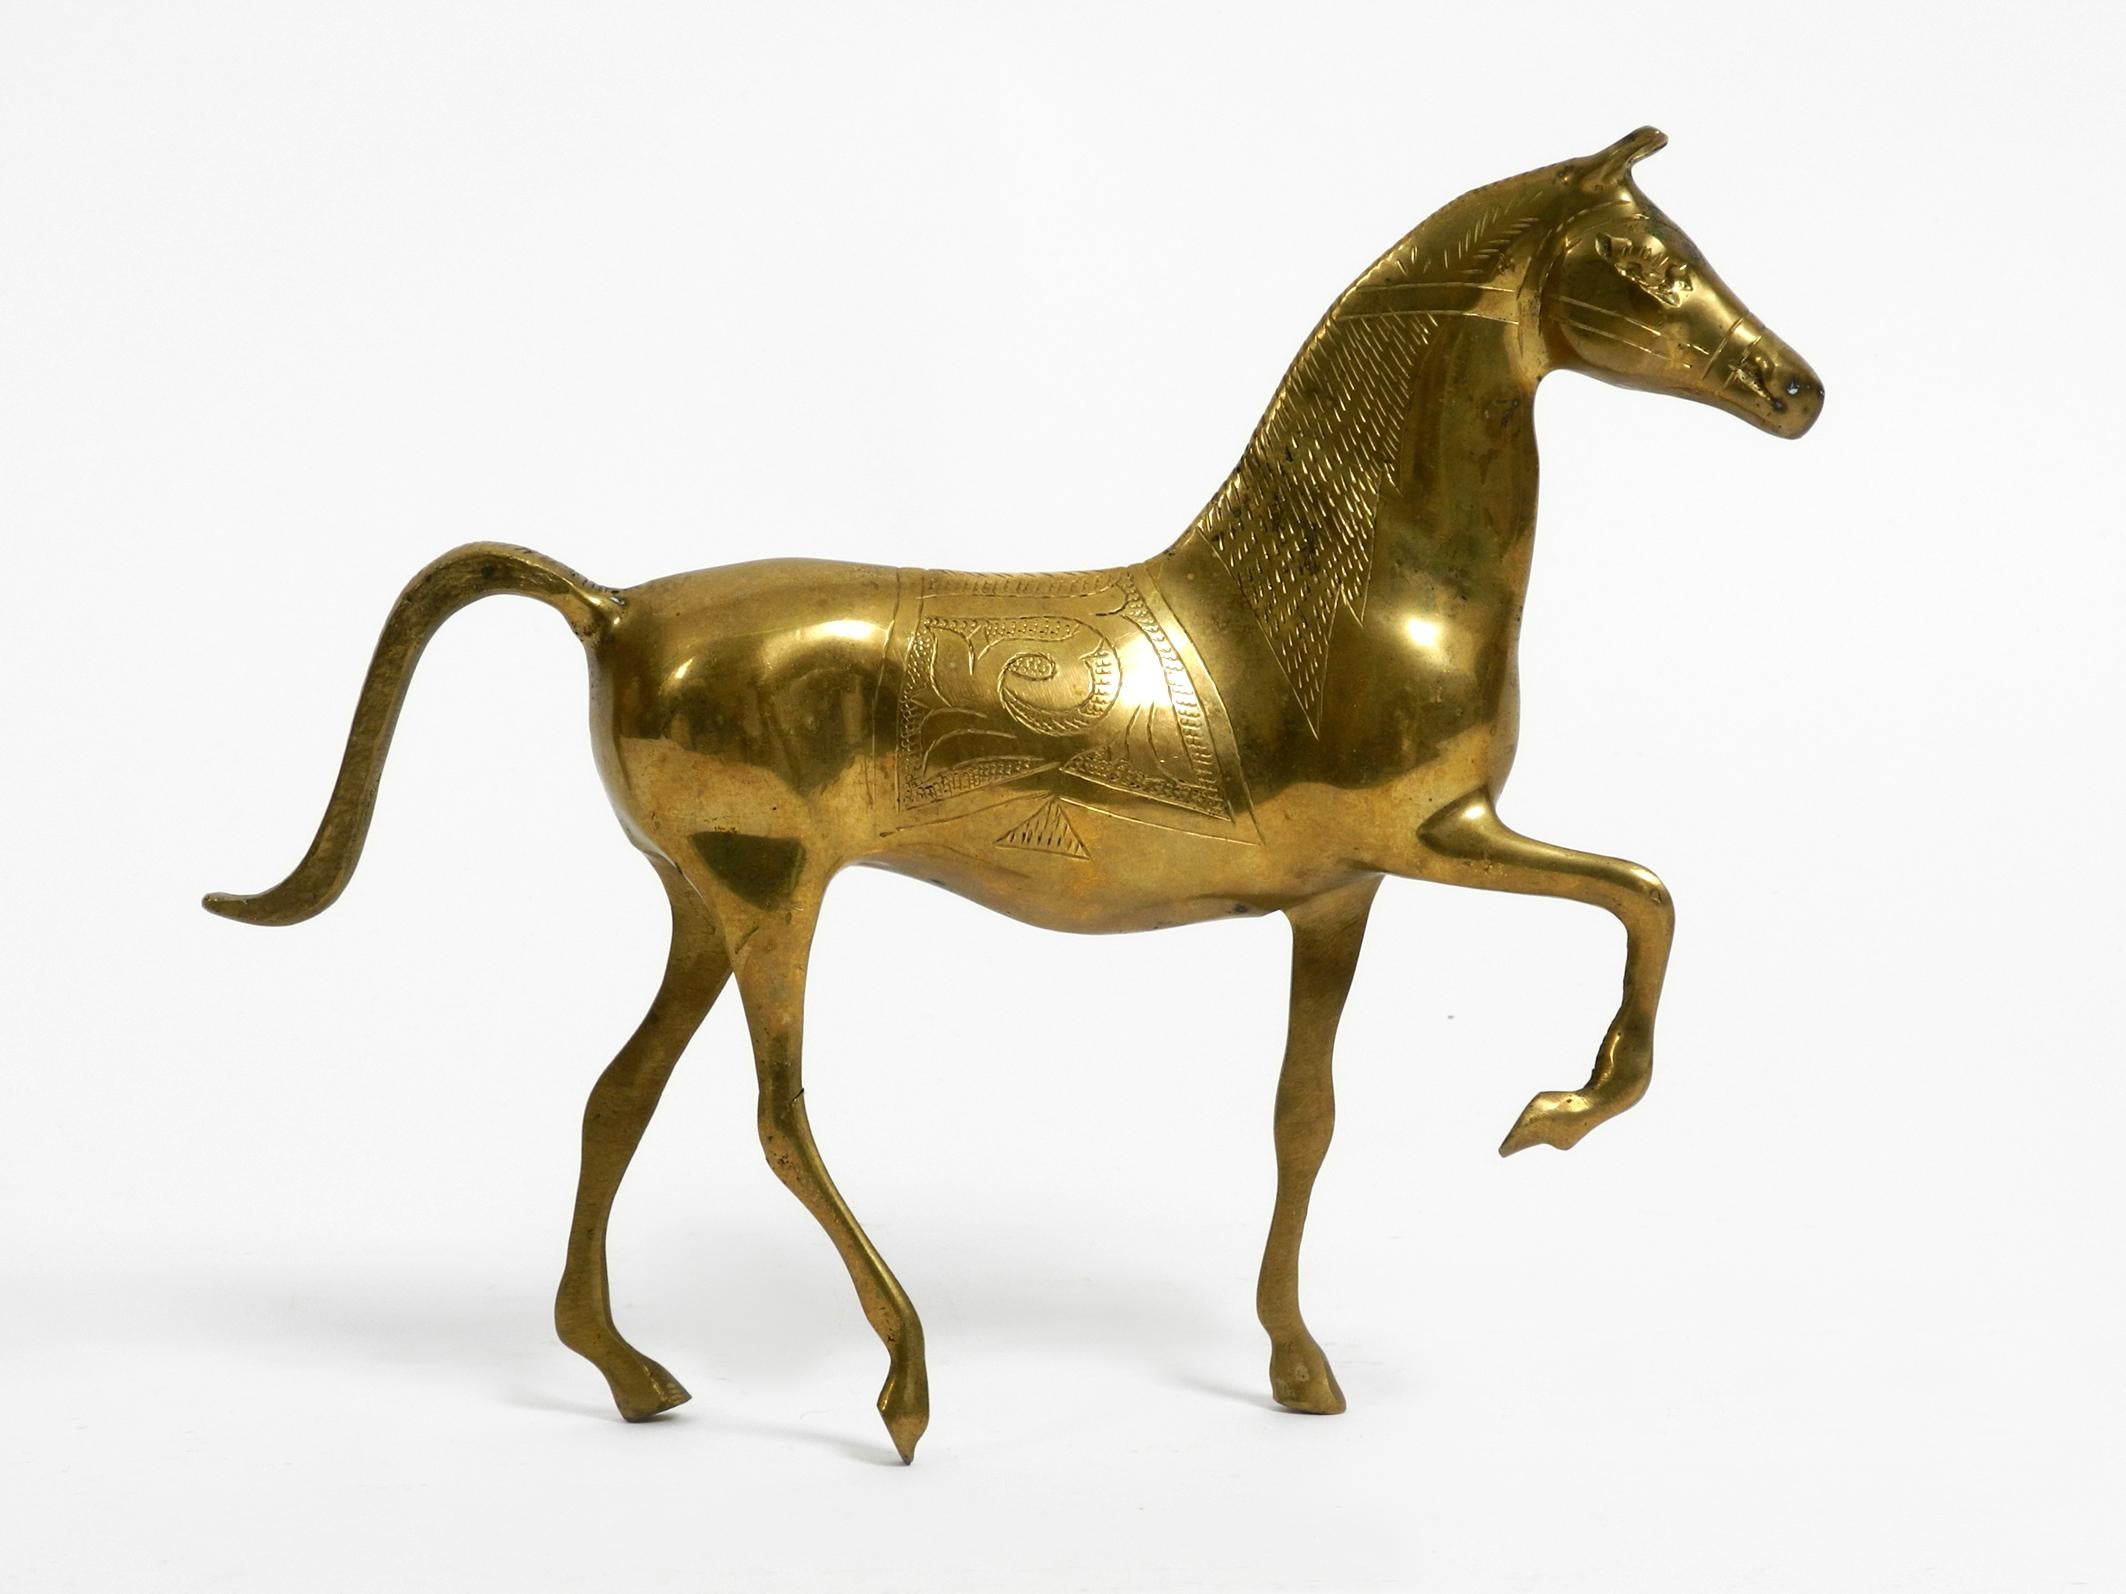 Very rare heavy 1960s brass horse as decoration.
Beautiful elegant design in very good condition.
Made of solid brass with a great patina and very decorative.
Without damages and not oxidized.
Finished by hand. You can see the details very well